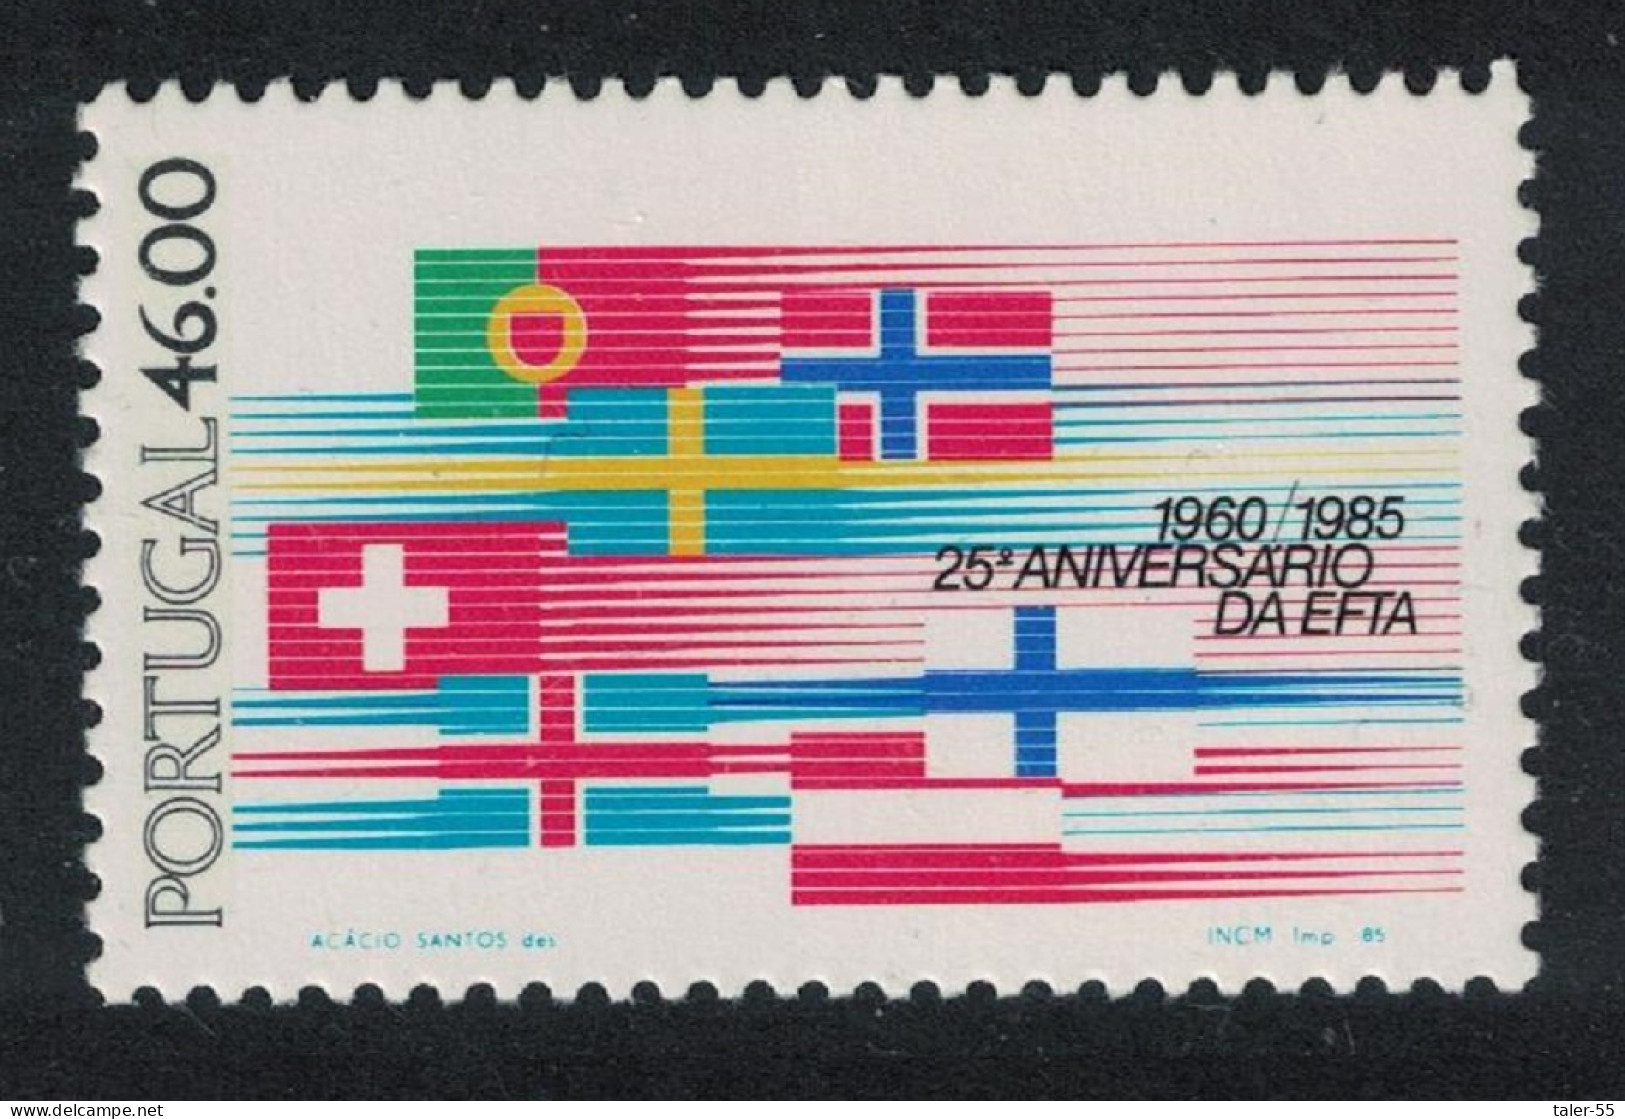 Portugal 25th Anniversary Of European Free Trade Association 1985 MNH SG#1989 - Unused Stamps